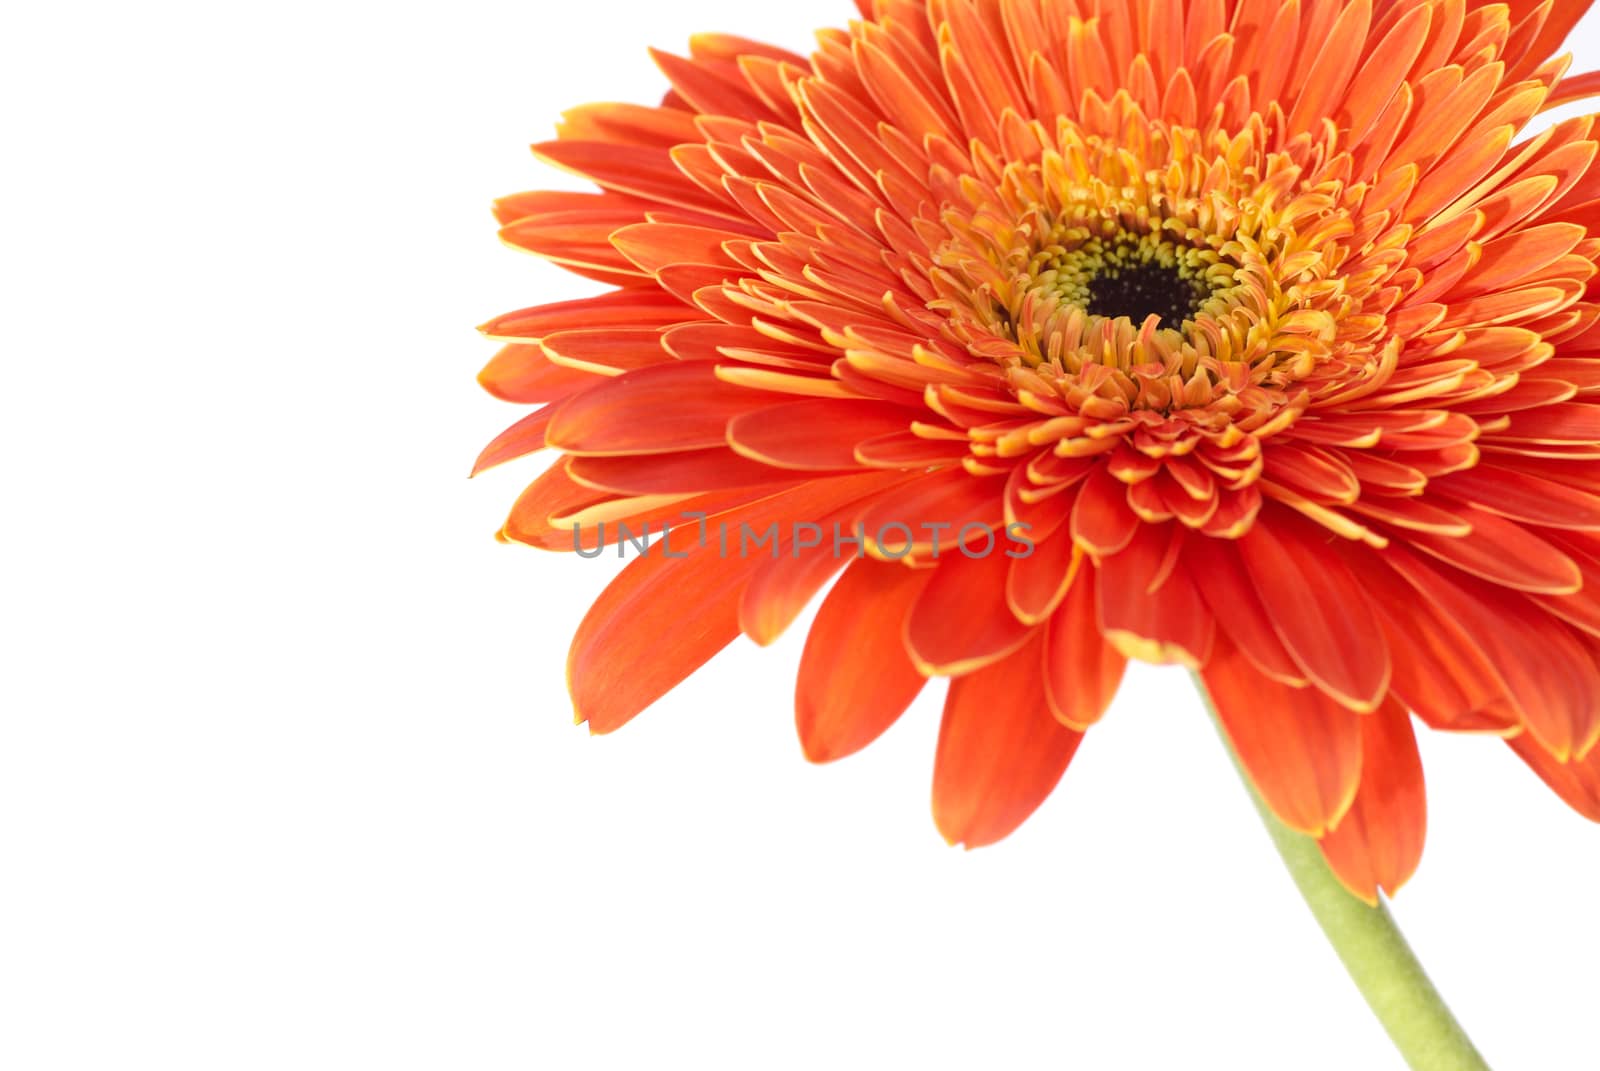 Red flower gerbera isolated on white background